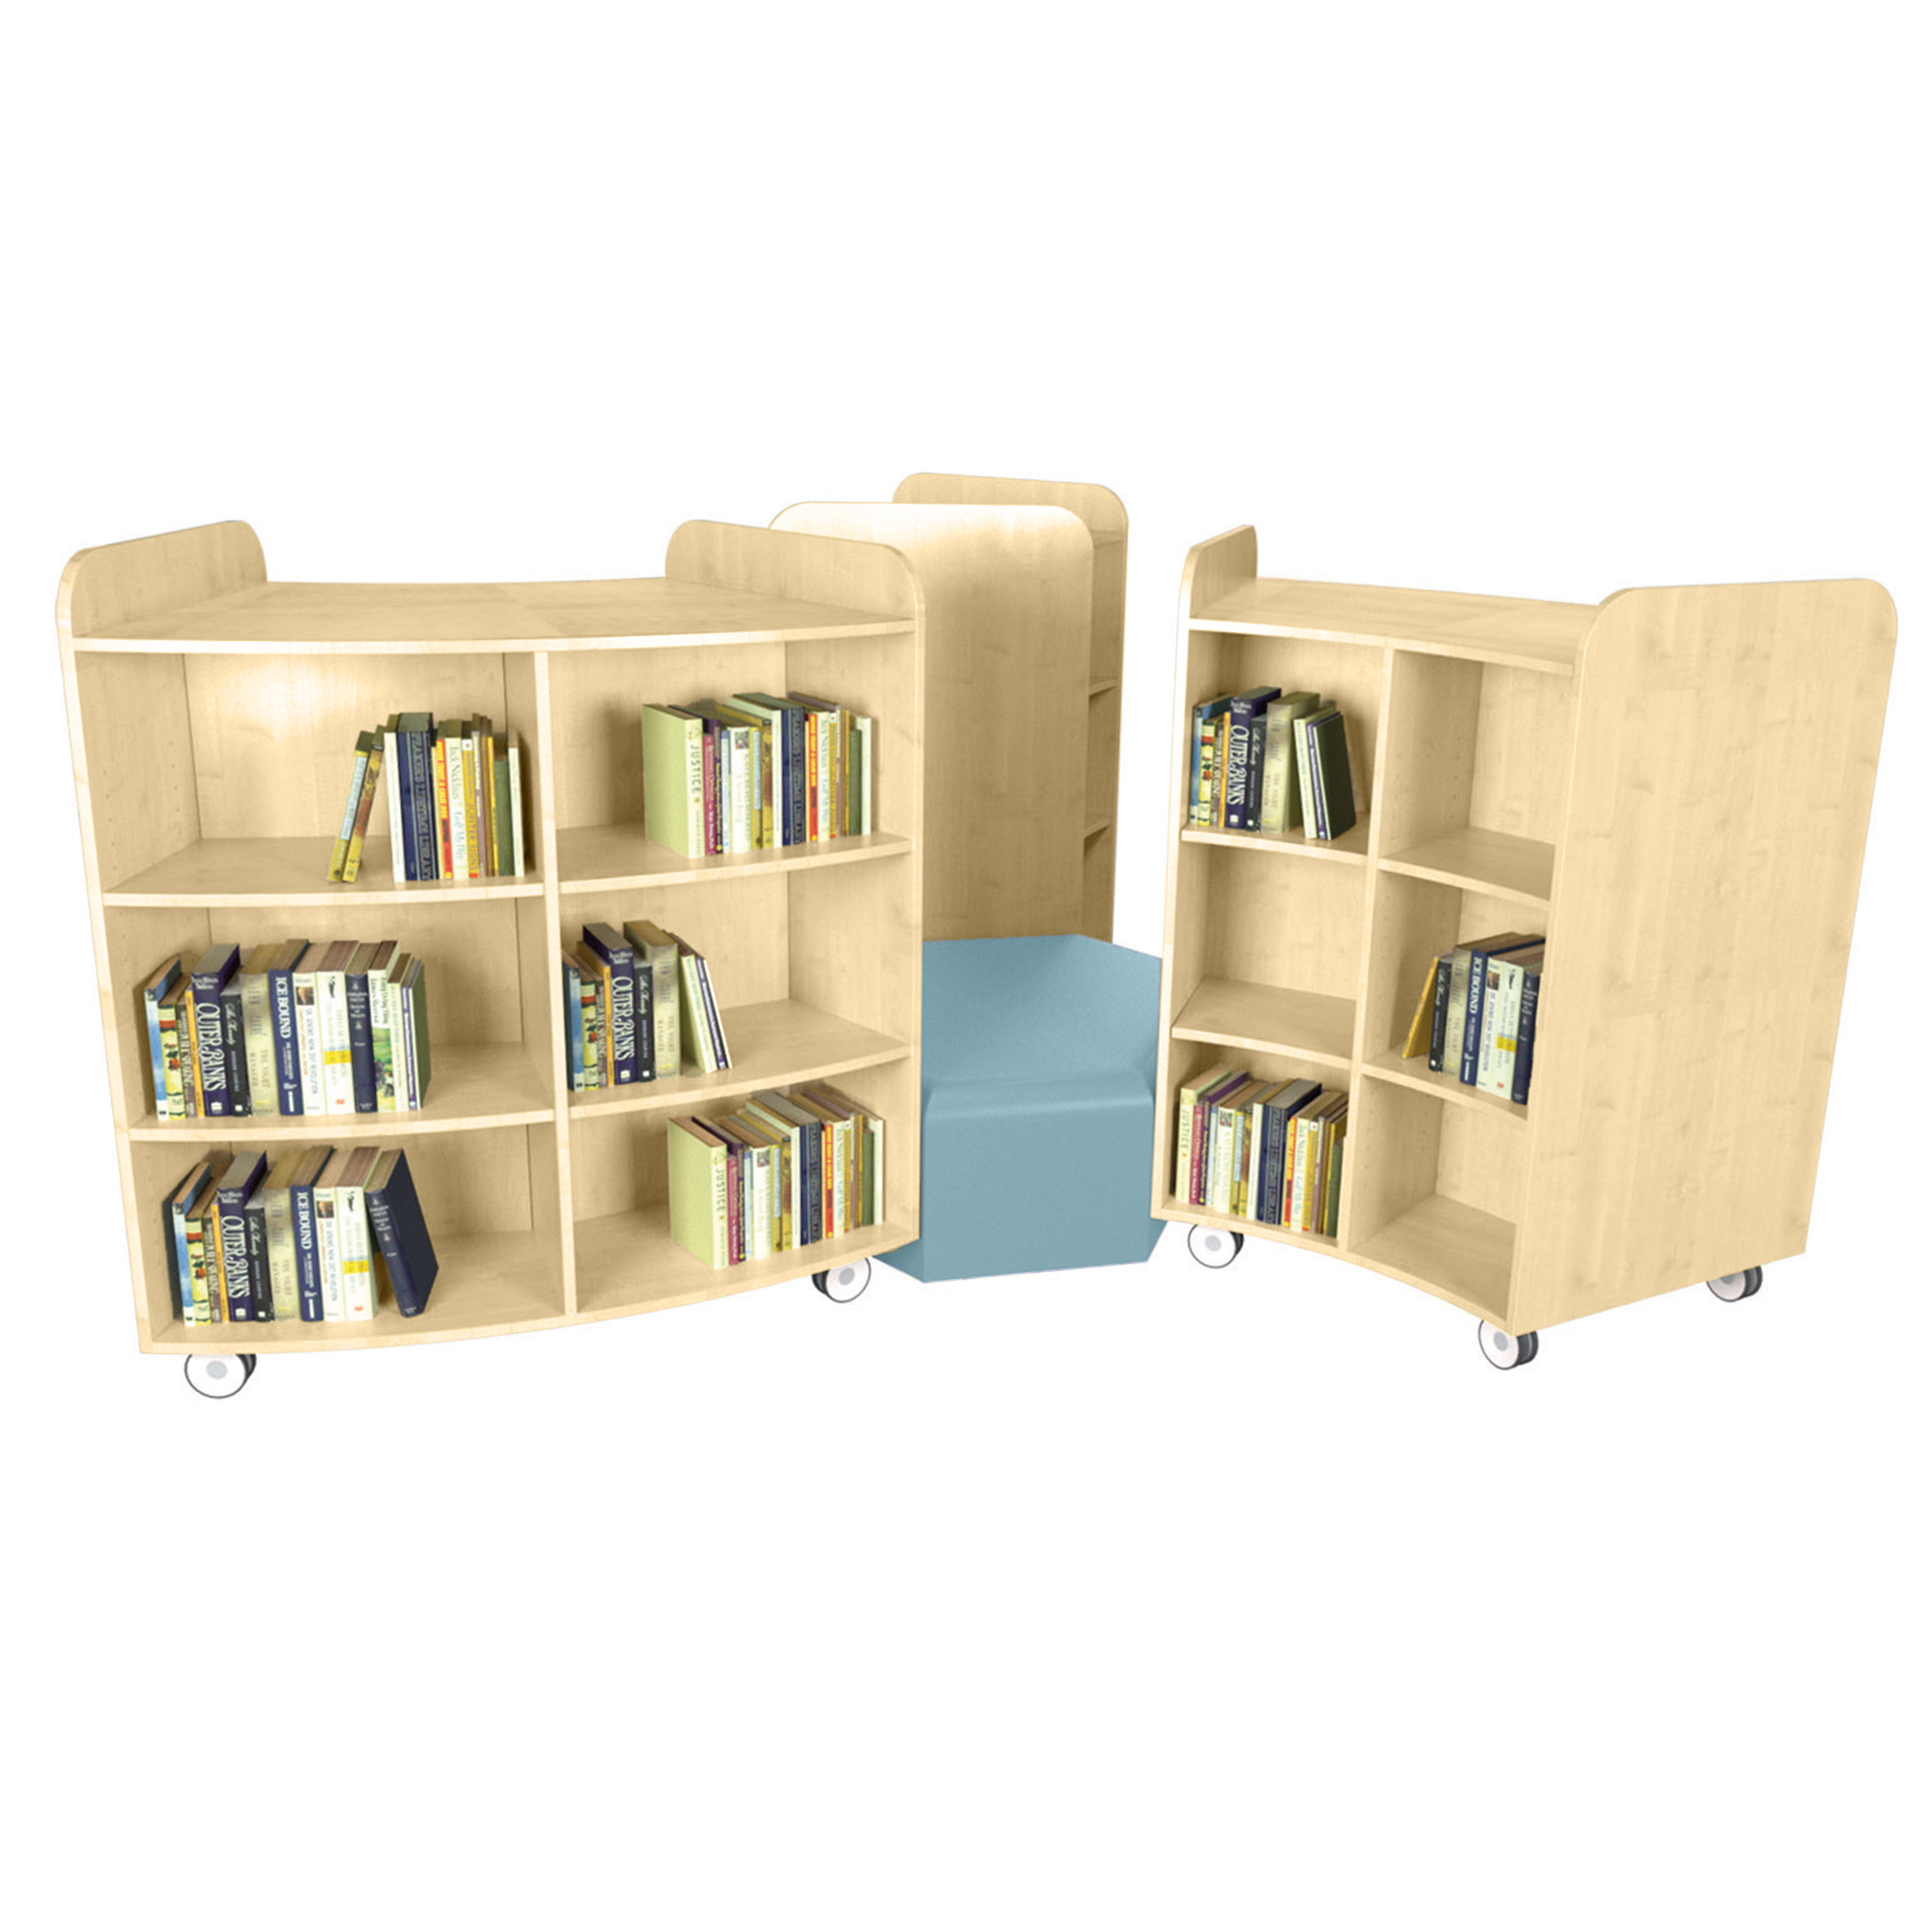 Maplescape Curved Library Island Set